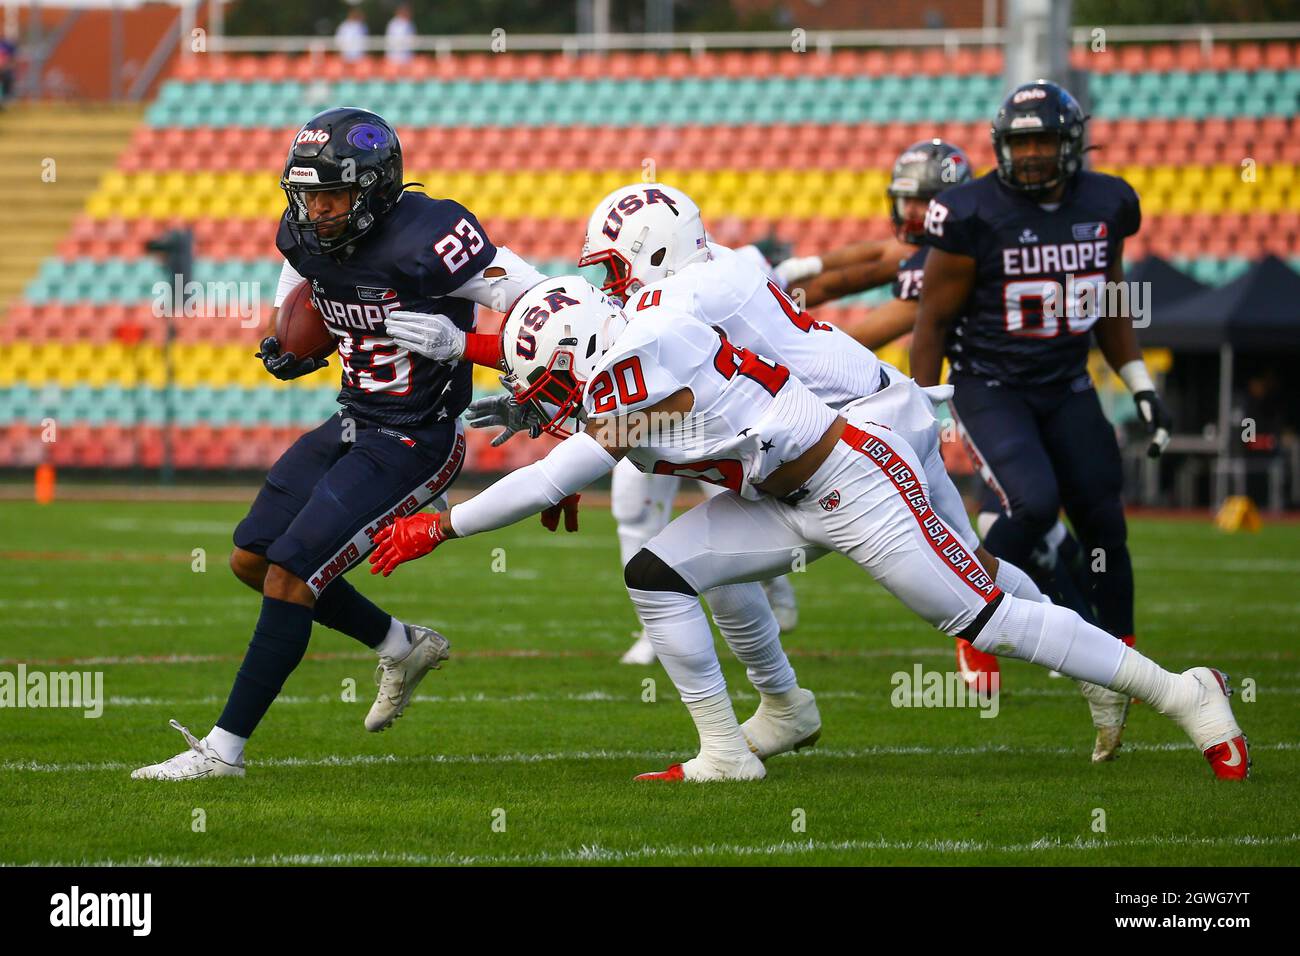 03 October 2021, Berlin: American Football: All Star Game, European League  of Football - Team USA: Jamaal White (Team USA, M) and William Loayd (Team  USA, r) try to stop Gerald Ameln (